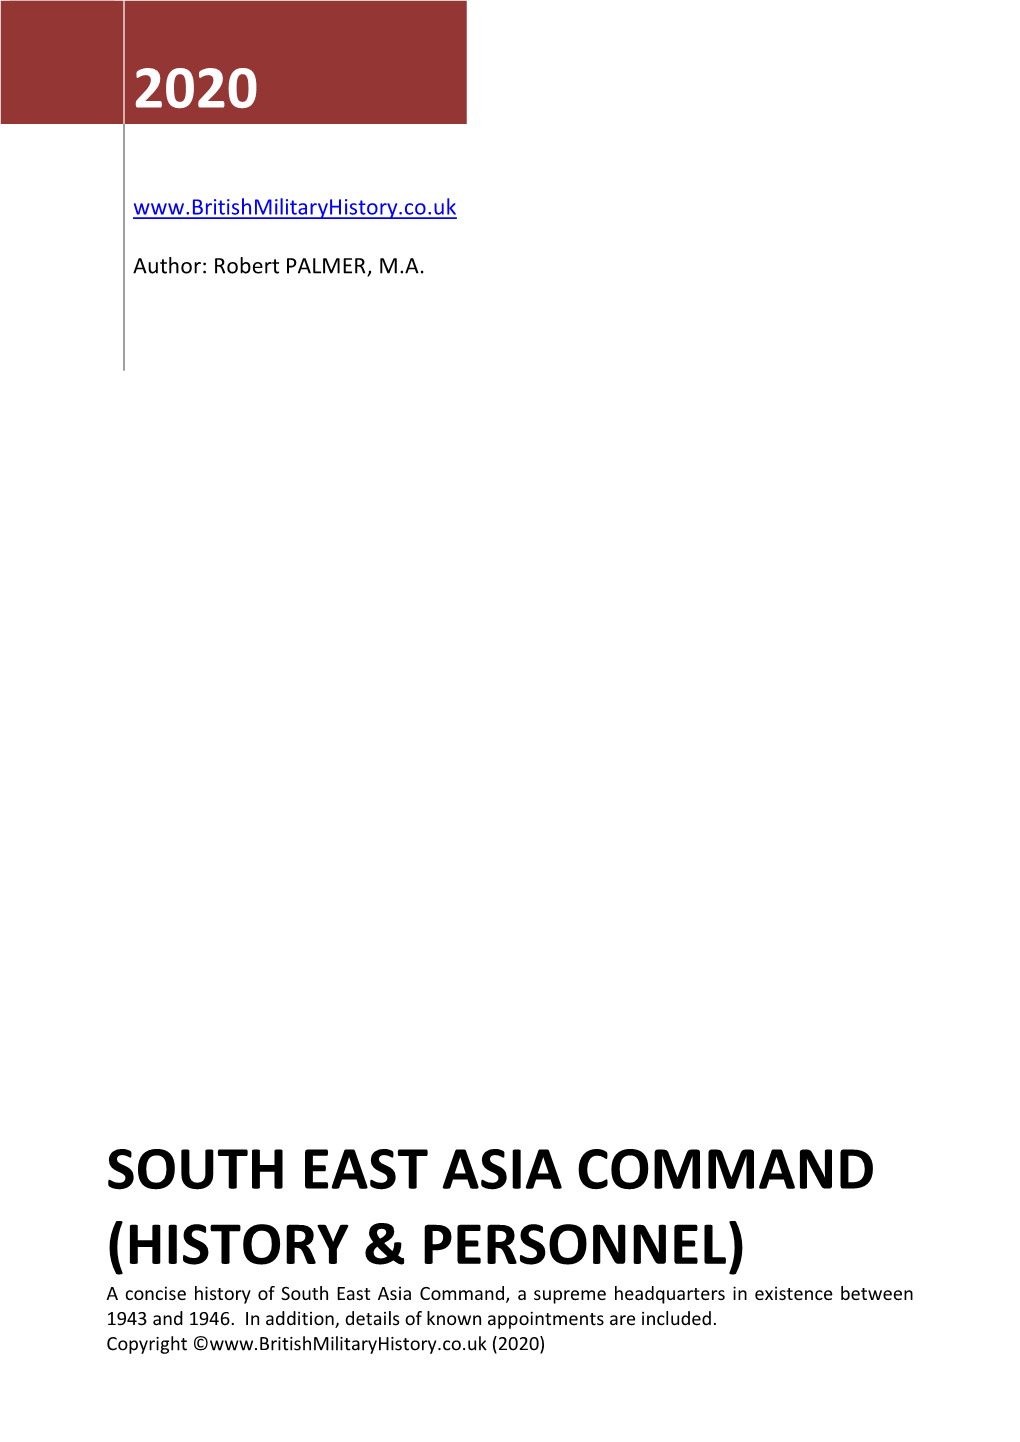 South East Asia Command H & P